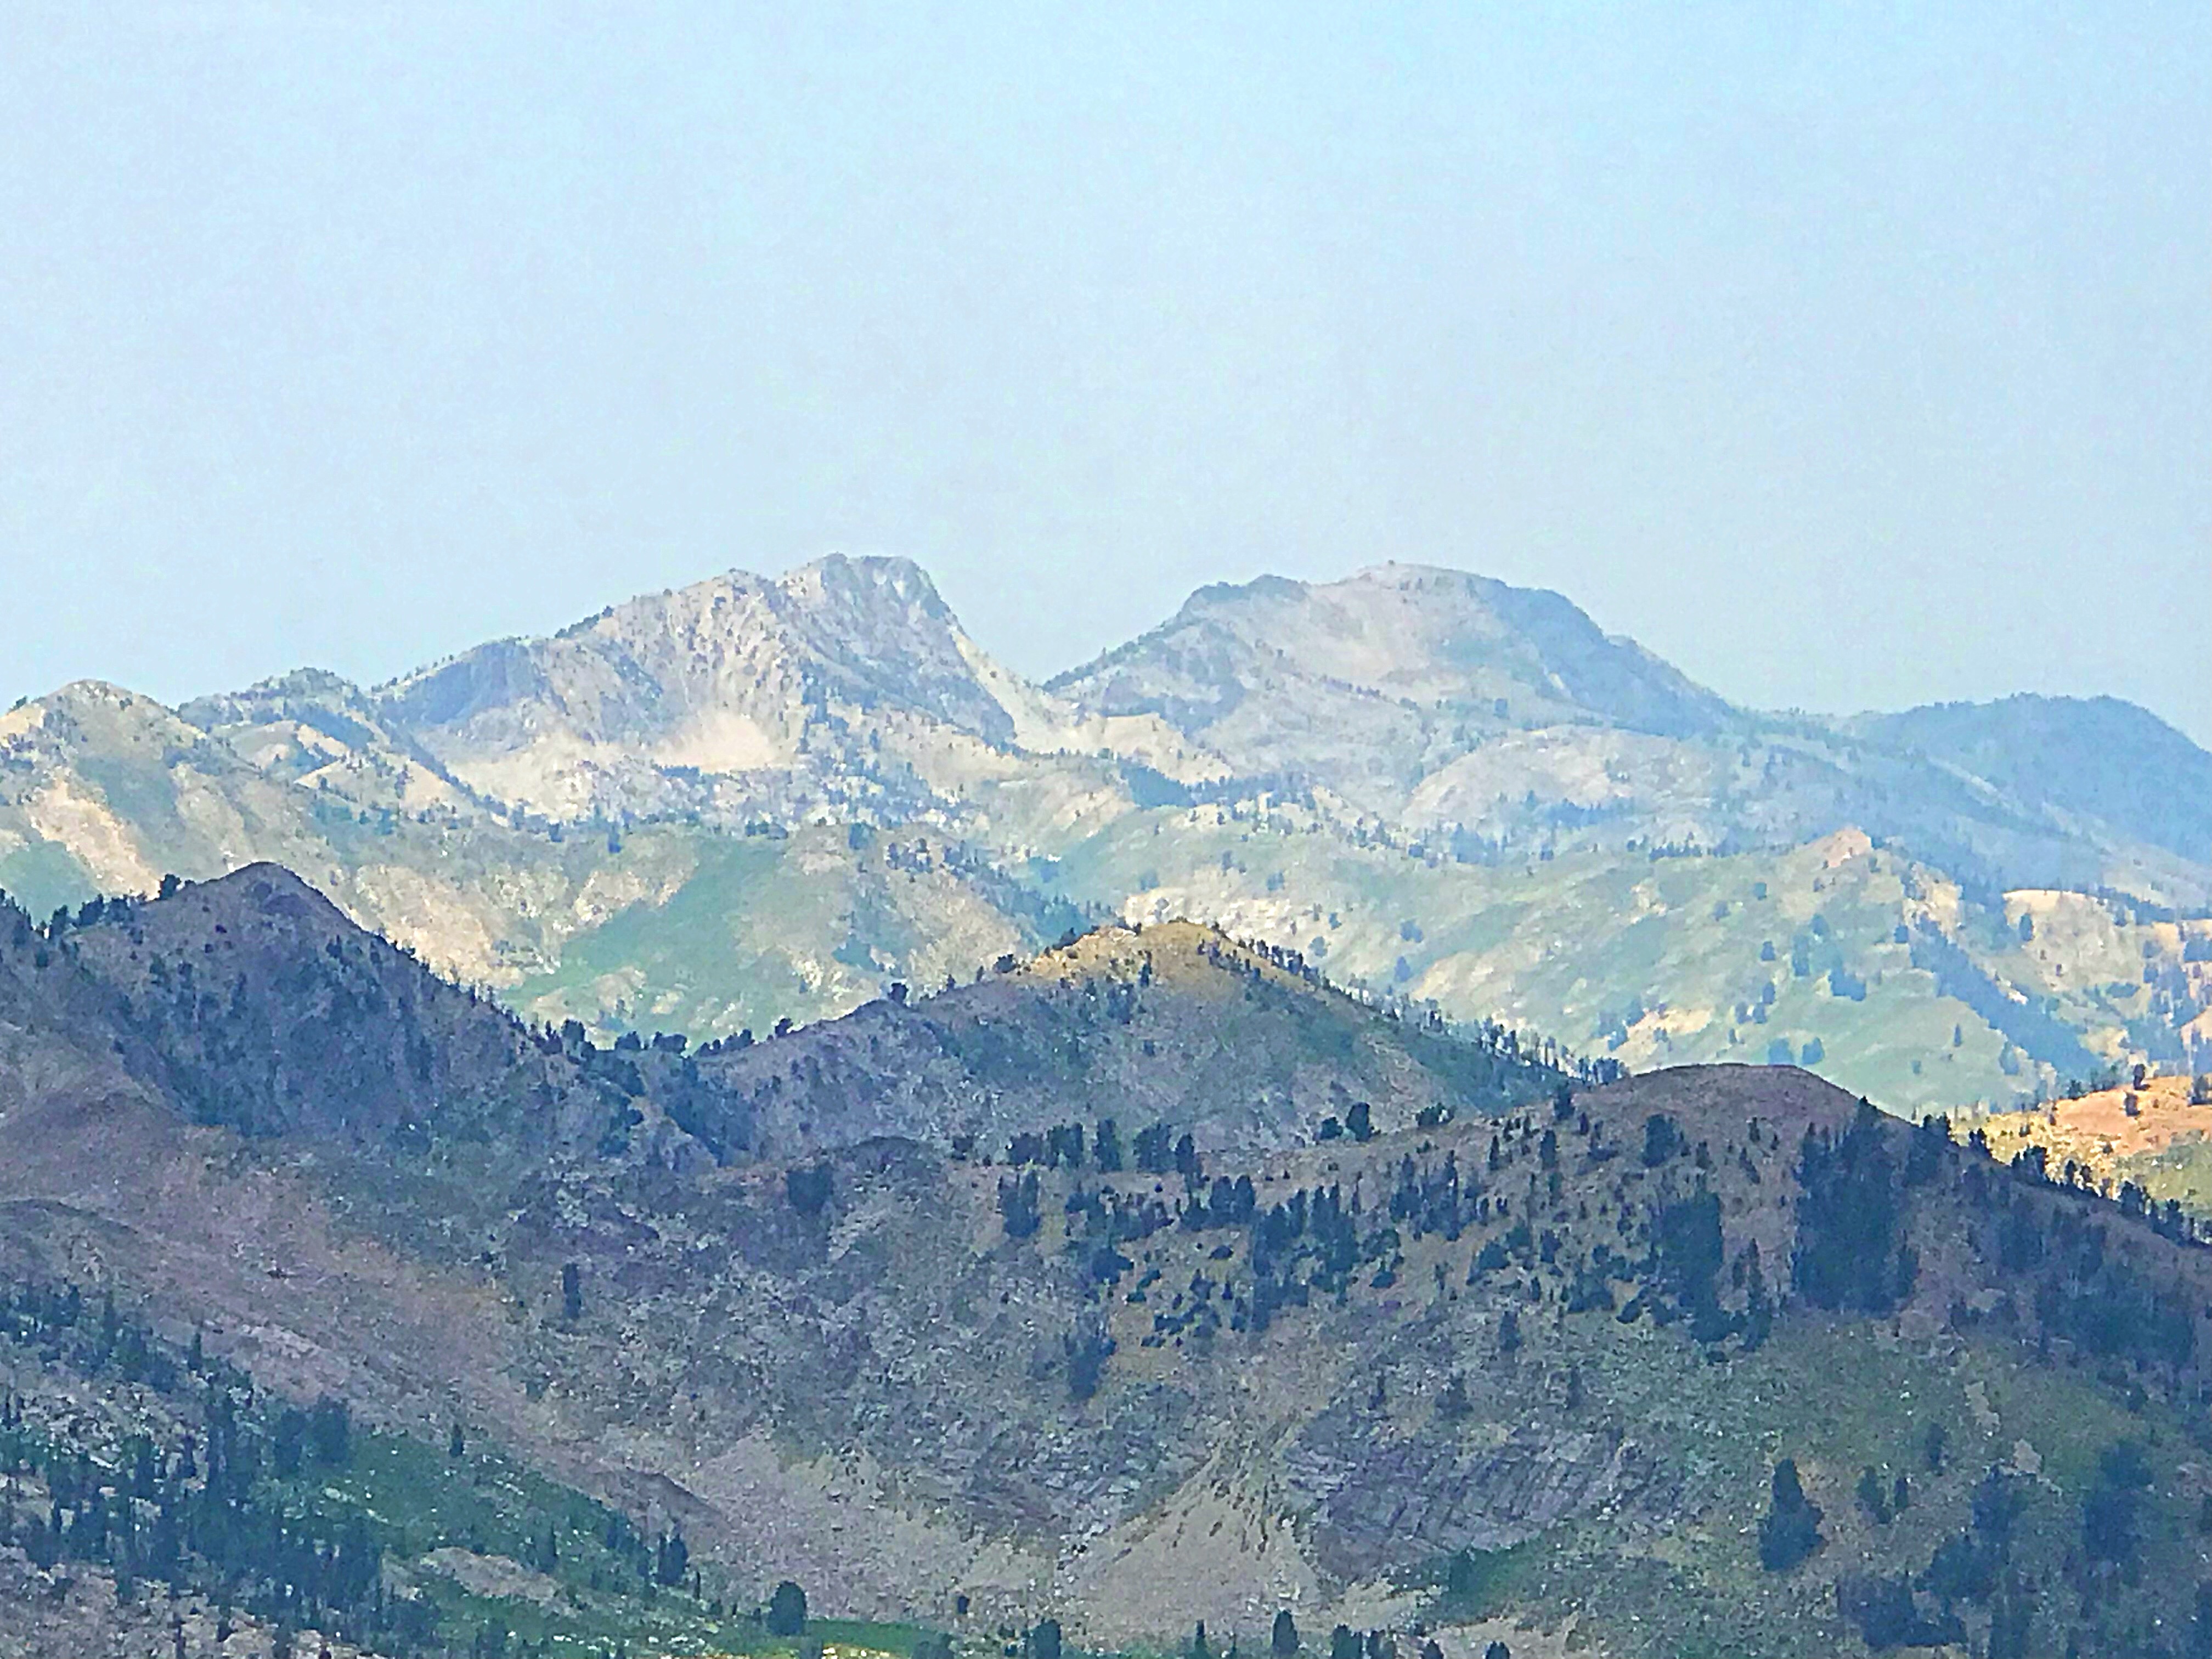 Peak 9712 (left) and Iron Mountain (right) viewed from the east.